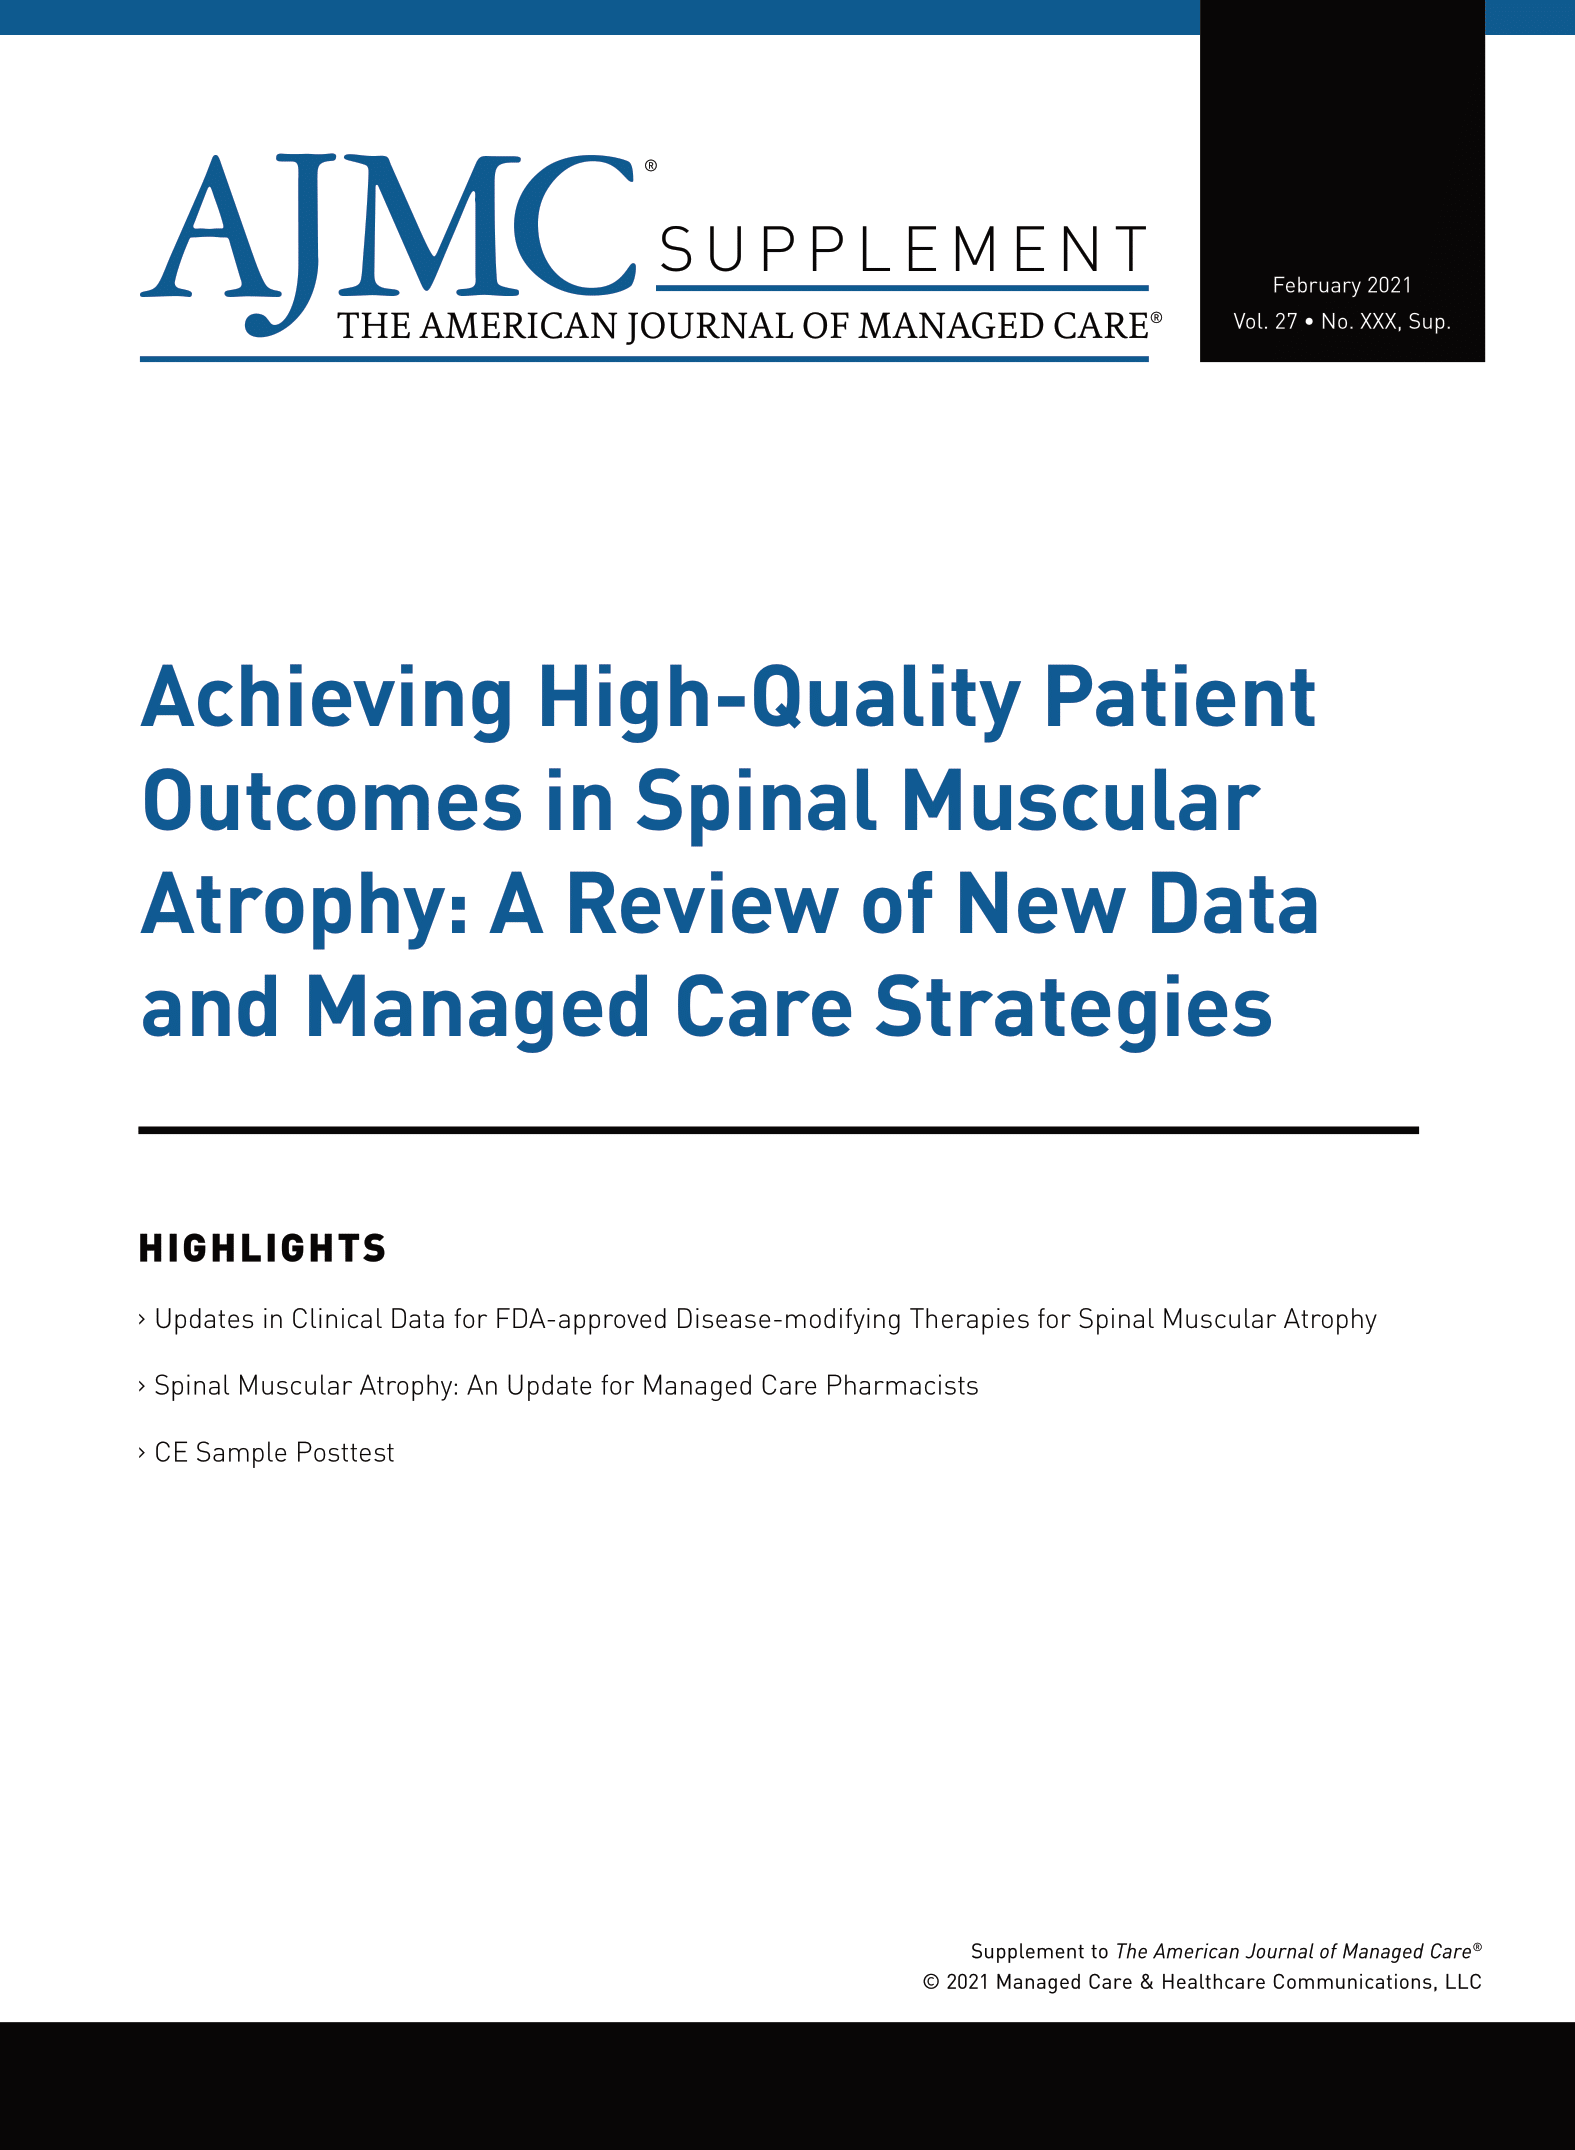 Achieving High-Quality Patient Outcomes in Spinal Muscular Atrophy: A Review of New Data and Managed Care Strategies